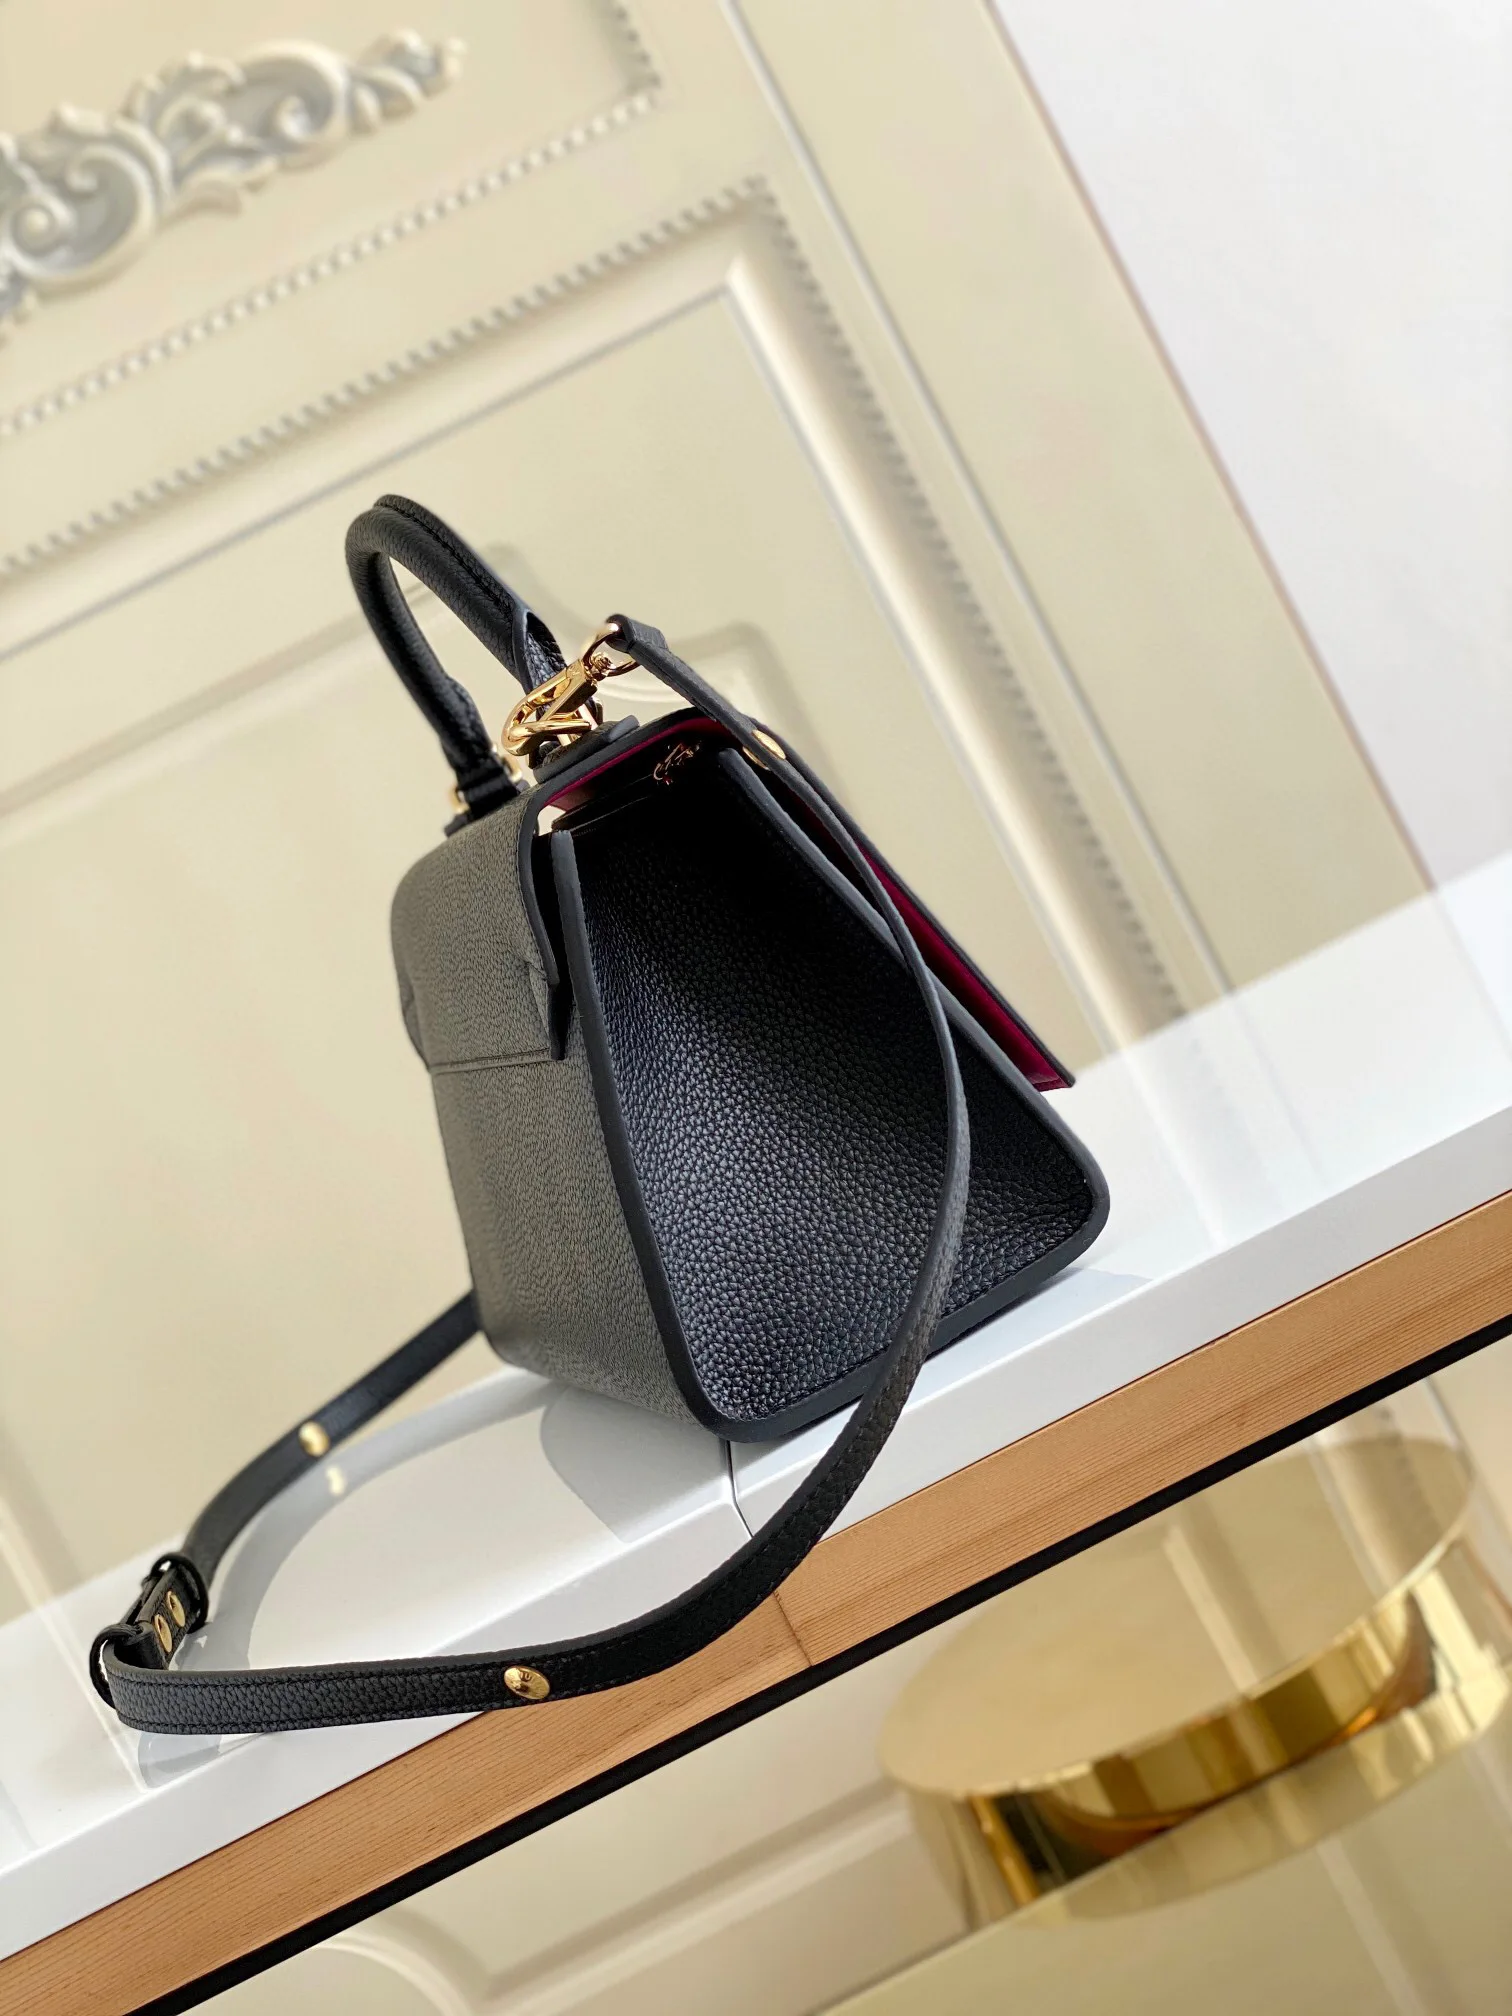 

2021 Top New Black Lychee Pattern Women's Hand-Held Diagonal Bag, Pink Inside, High-Quality Hardware, Luxury And Leisure Style